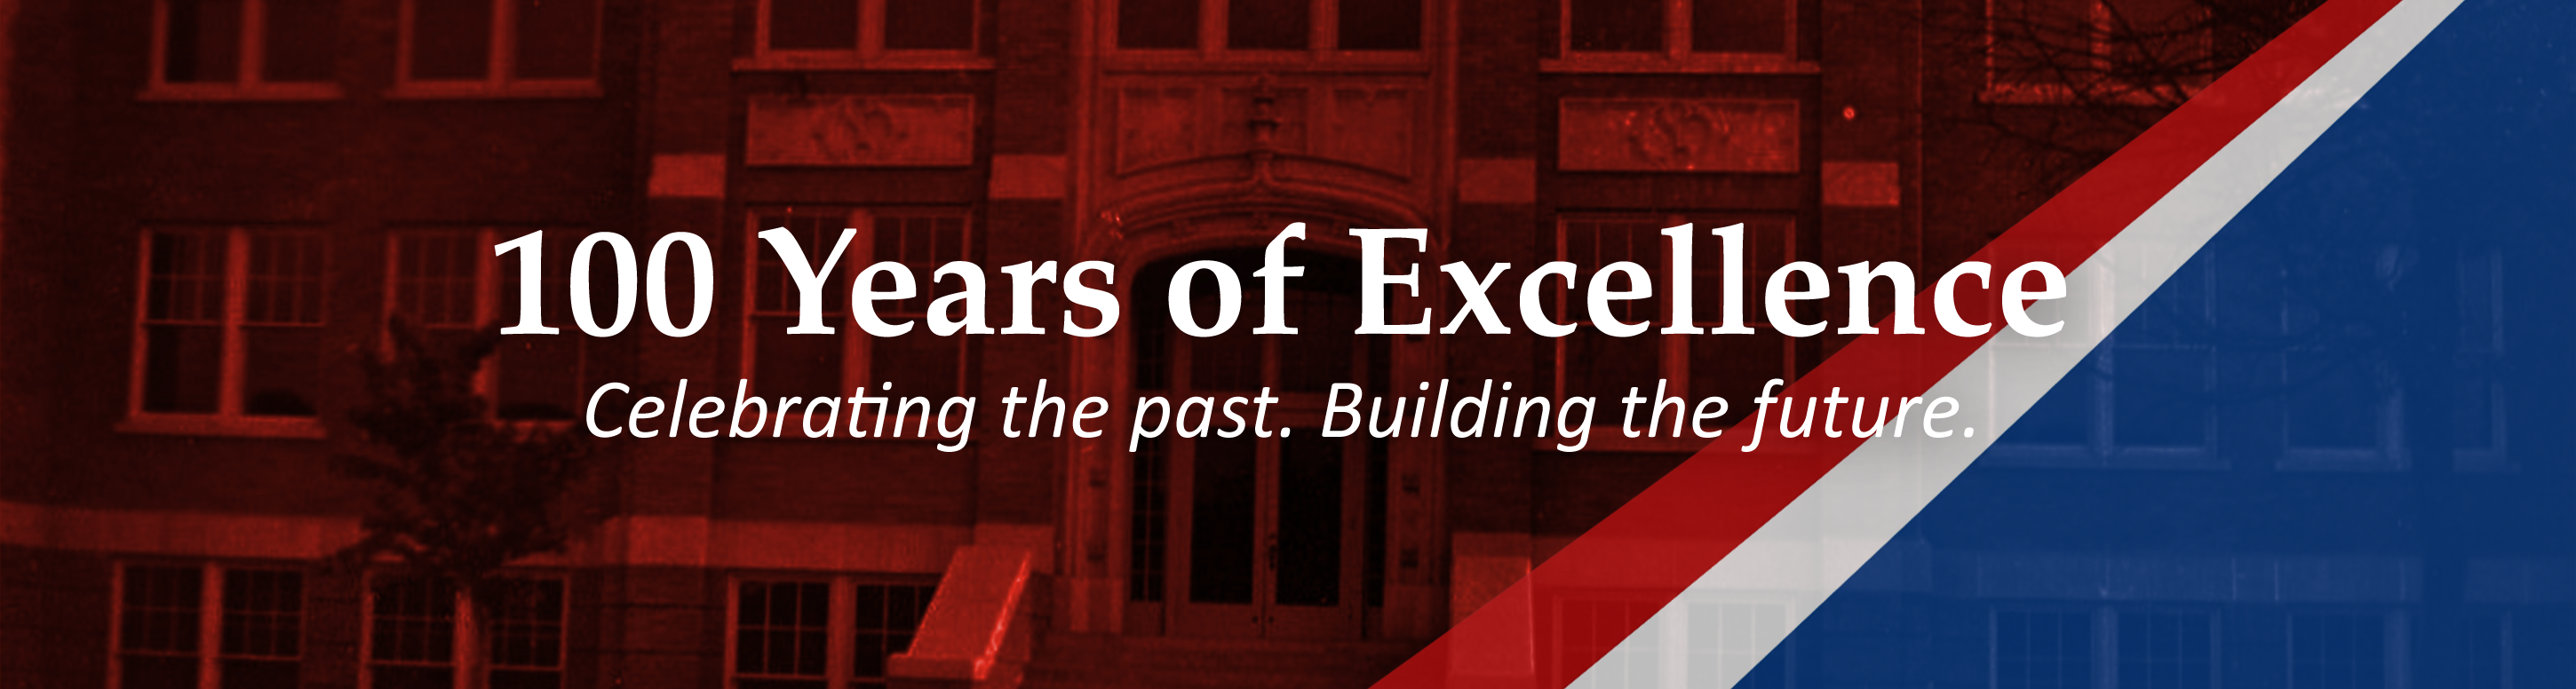 100 Years of Excellence. Celebrating the past. Building the future.